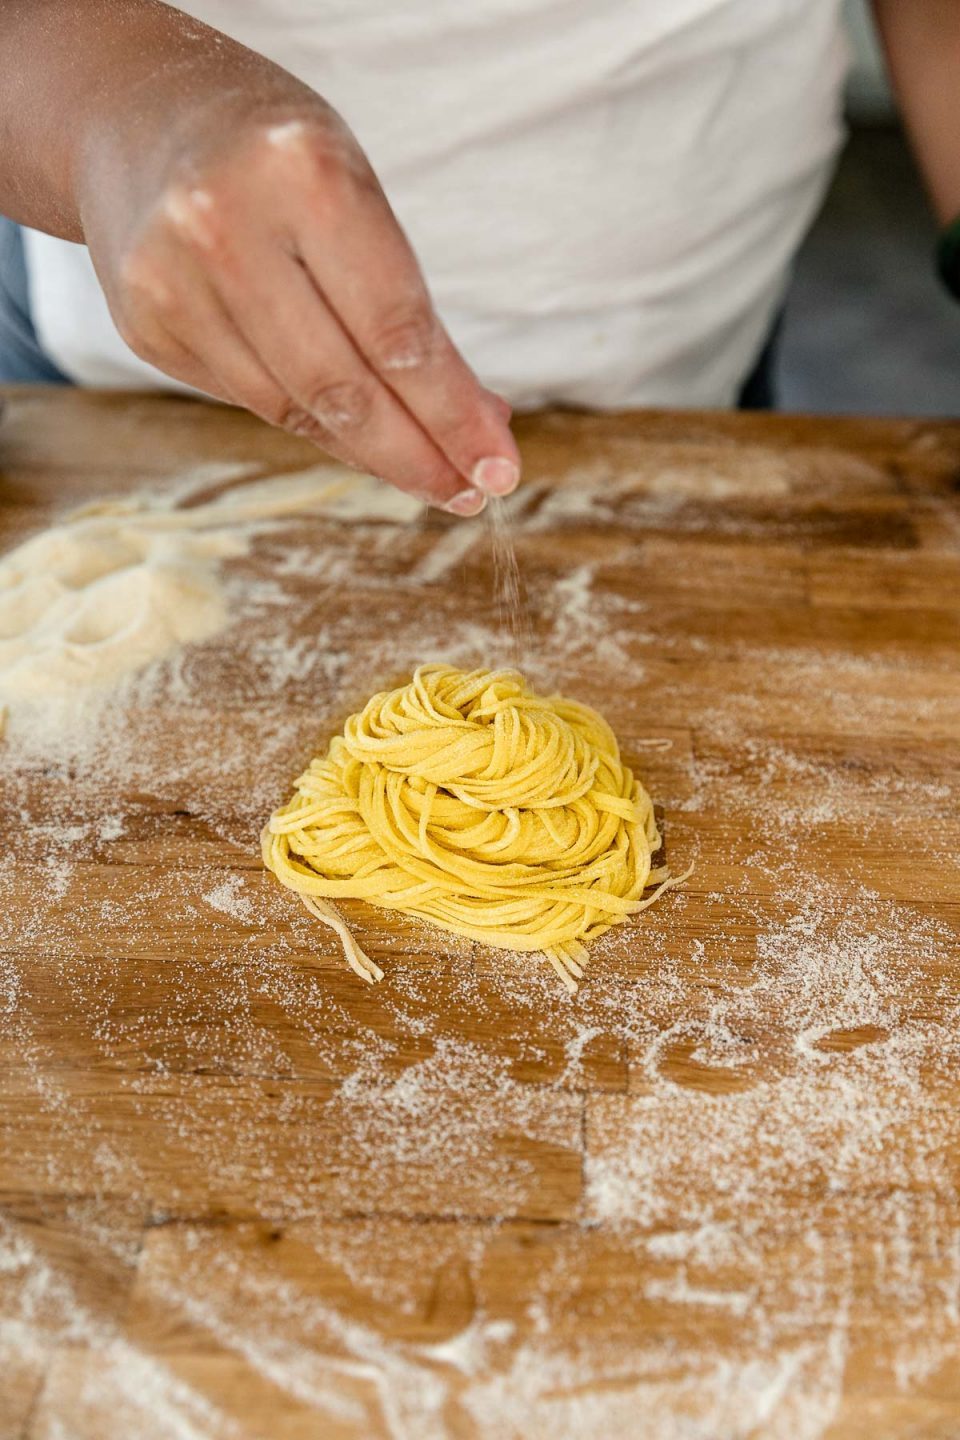 How to Make Homemade Pasta – Step-by-Step Easy Fresh Pasta Recipe